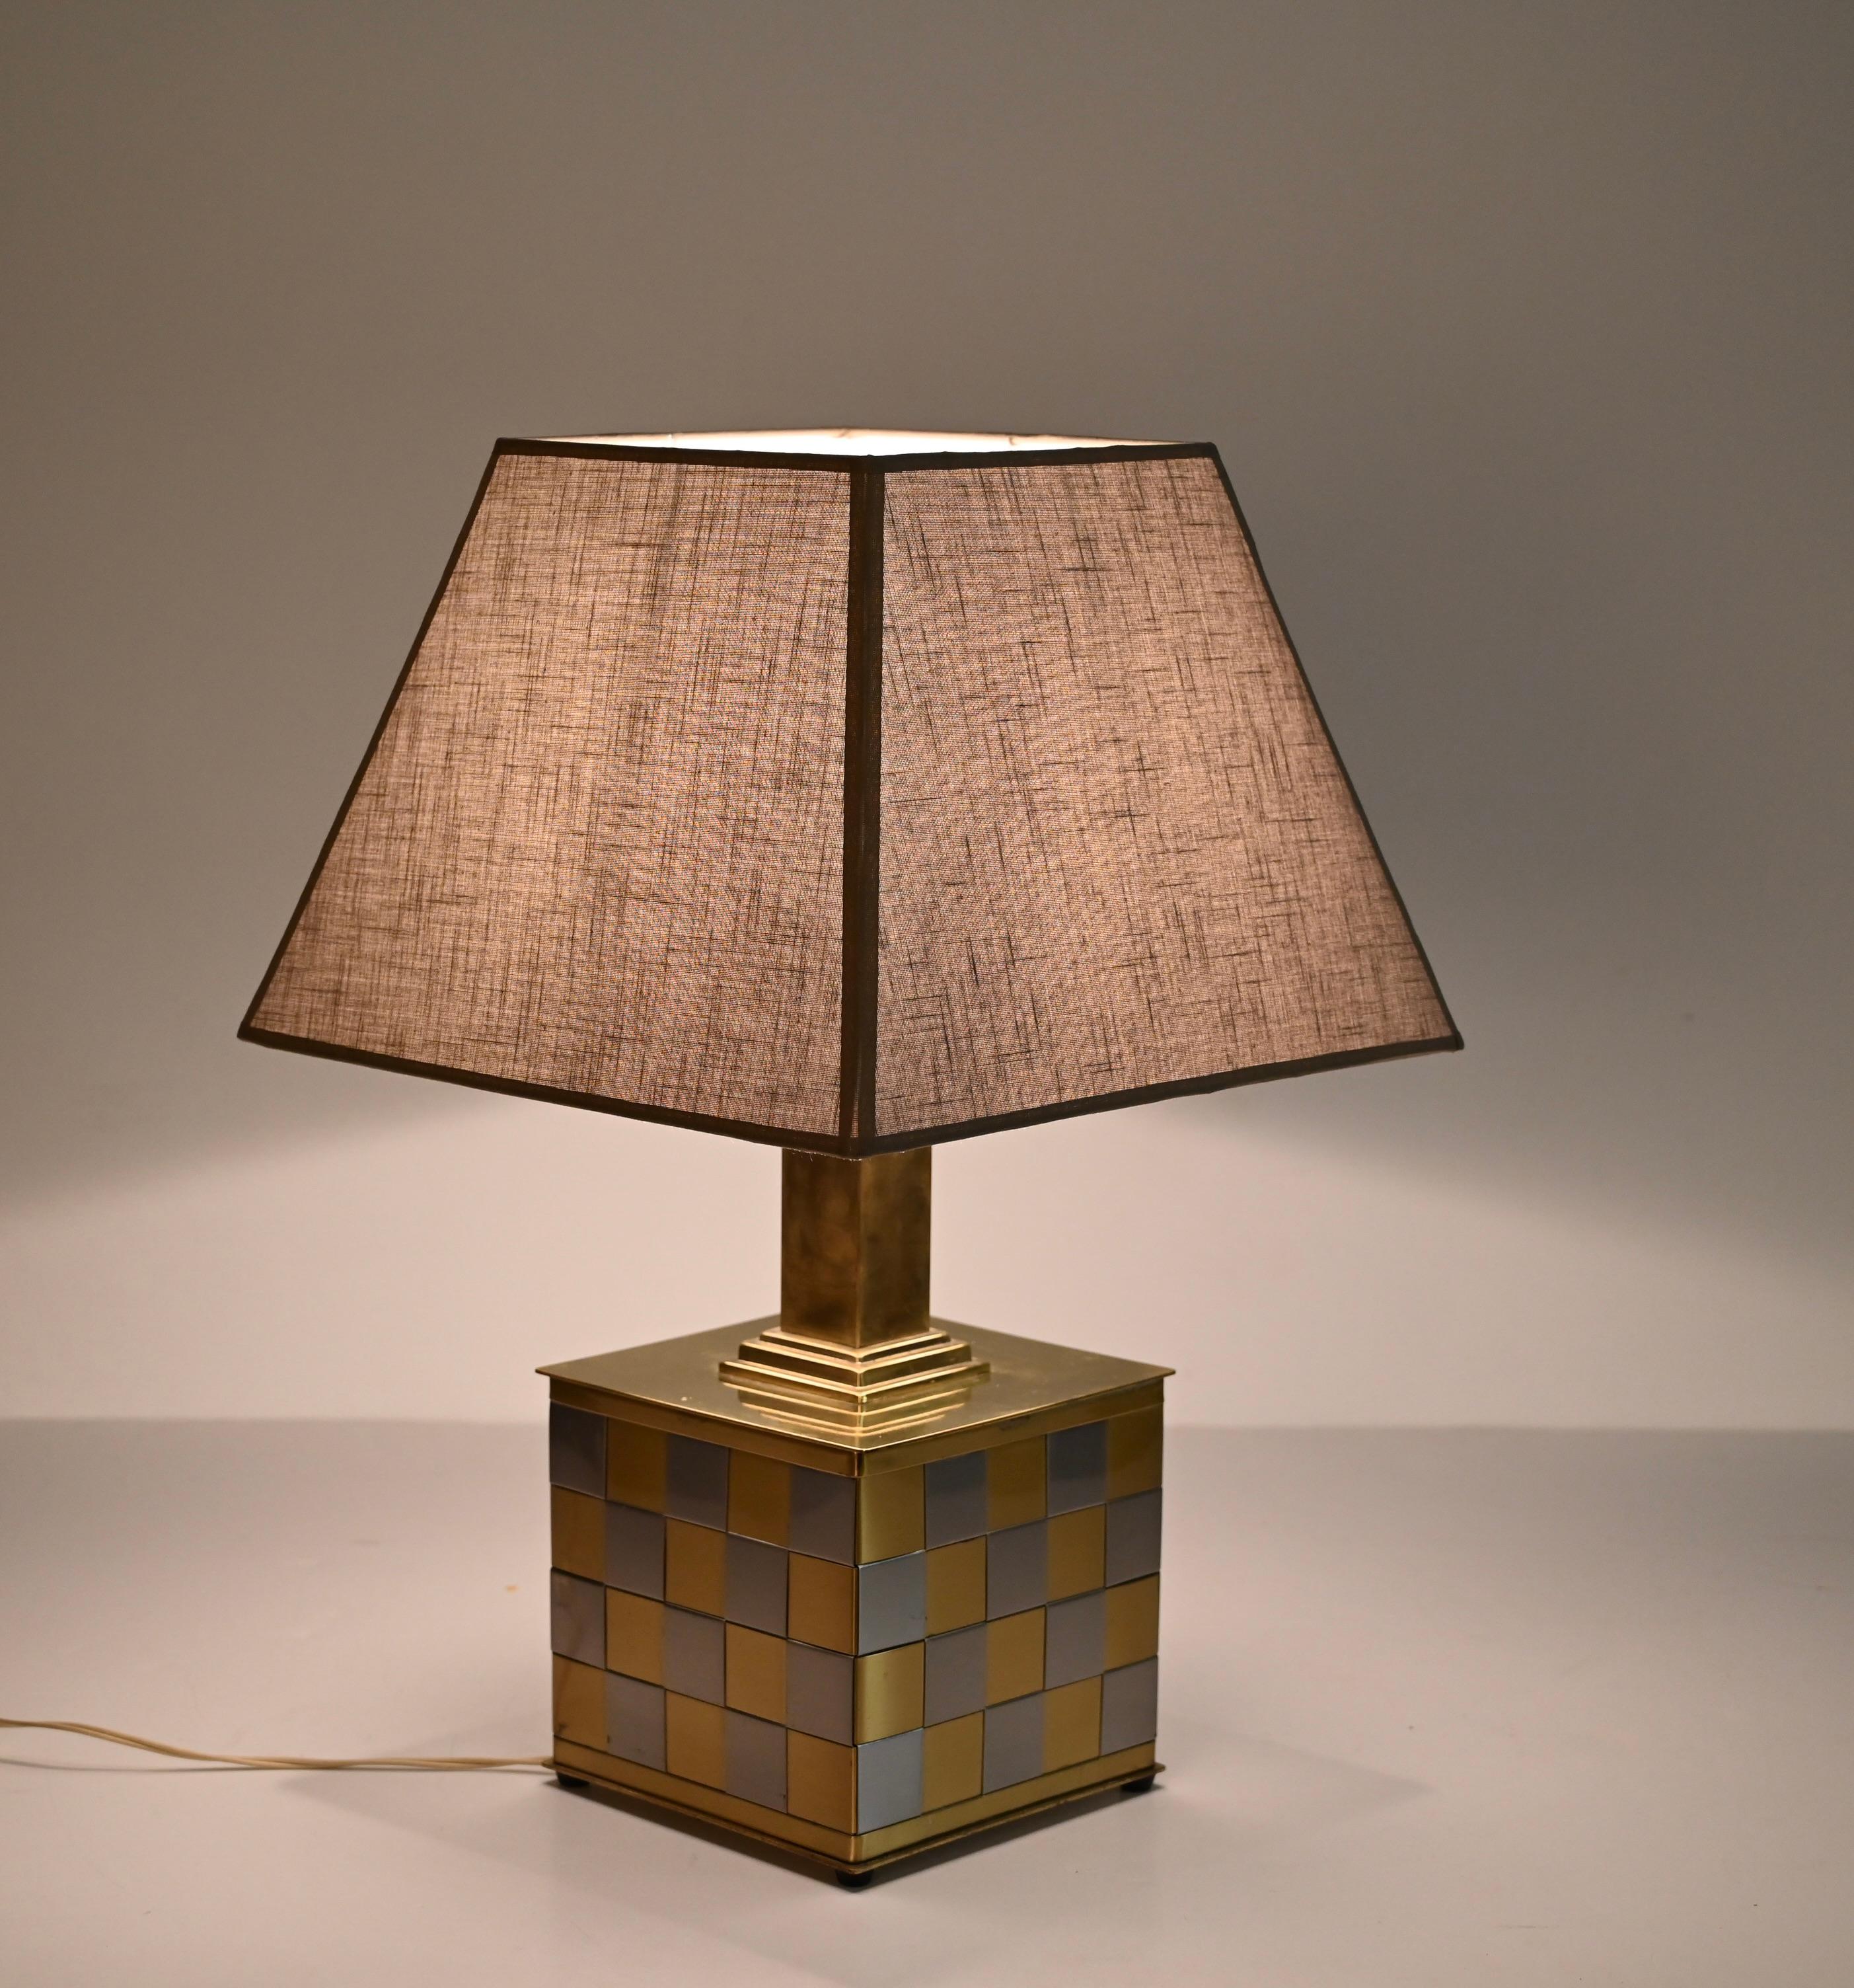 Midcentury Brass and Chrome Table Lamp, Willy Rizzo, Italy 1970s For Sale 6